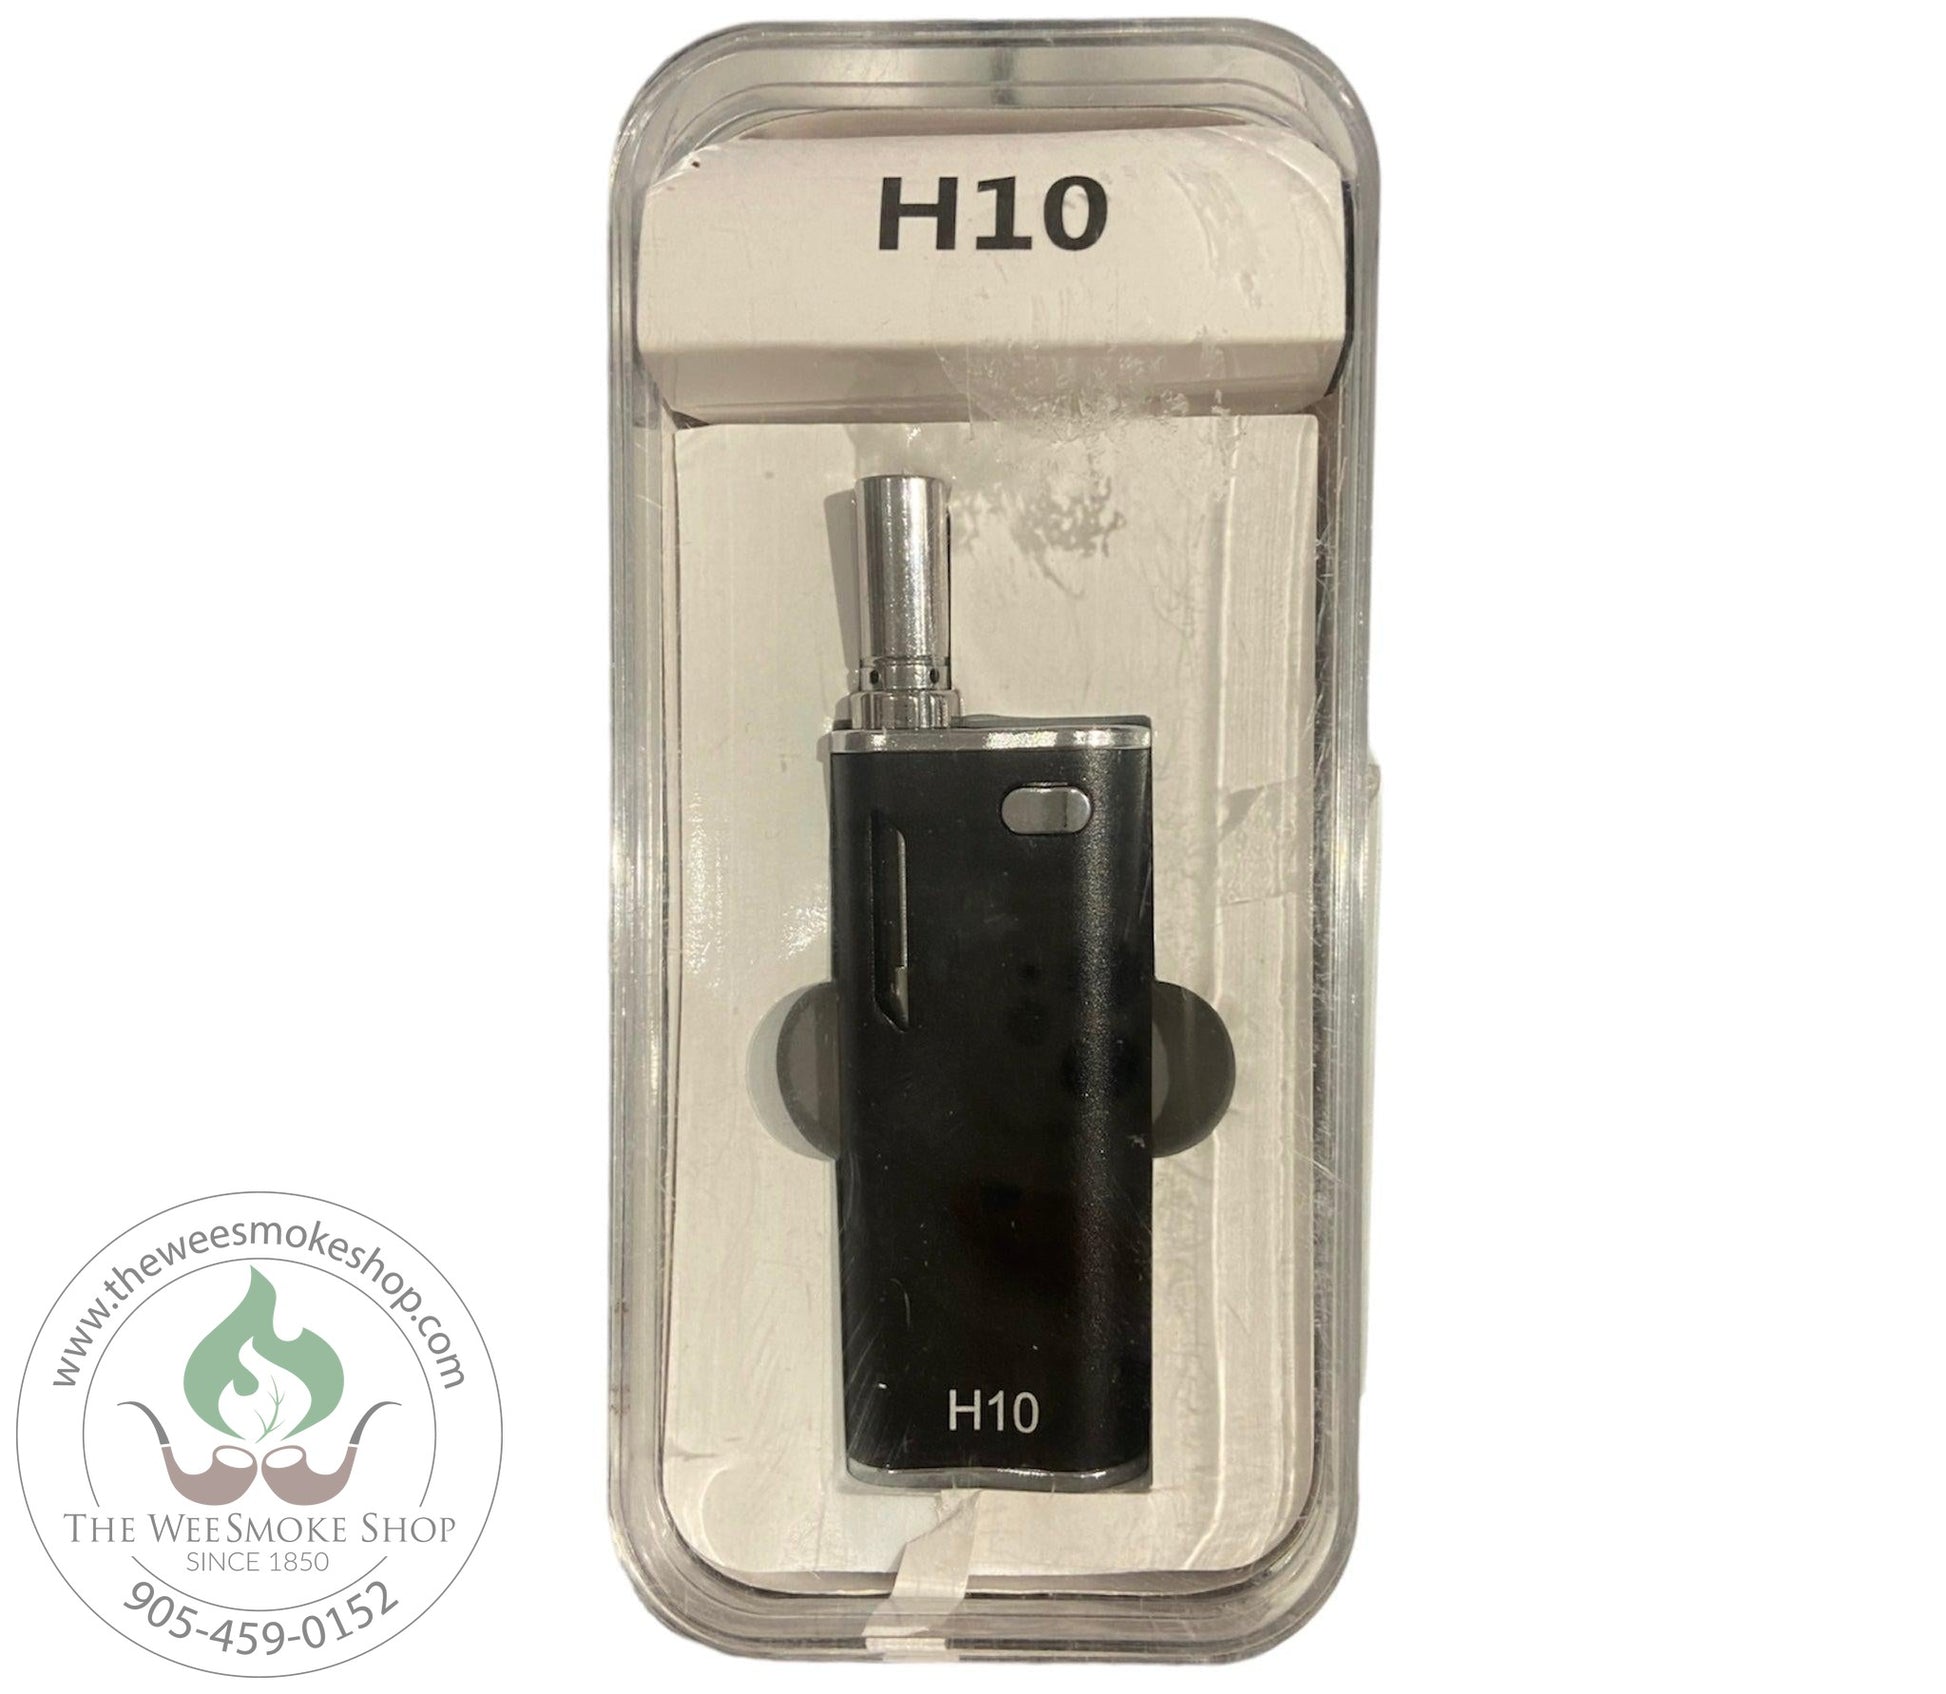 Black-Hibron H10 510 Concentrate Vaporizer-510-The Wee Smoke Shop